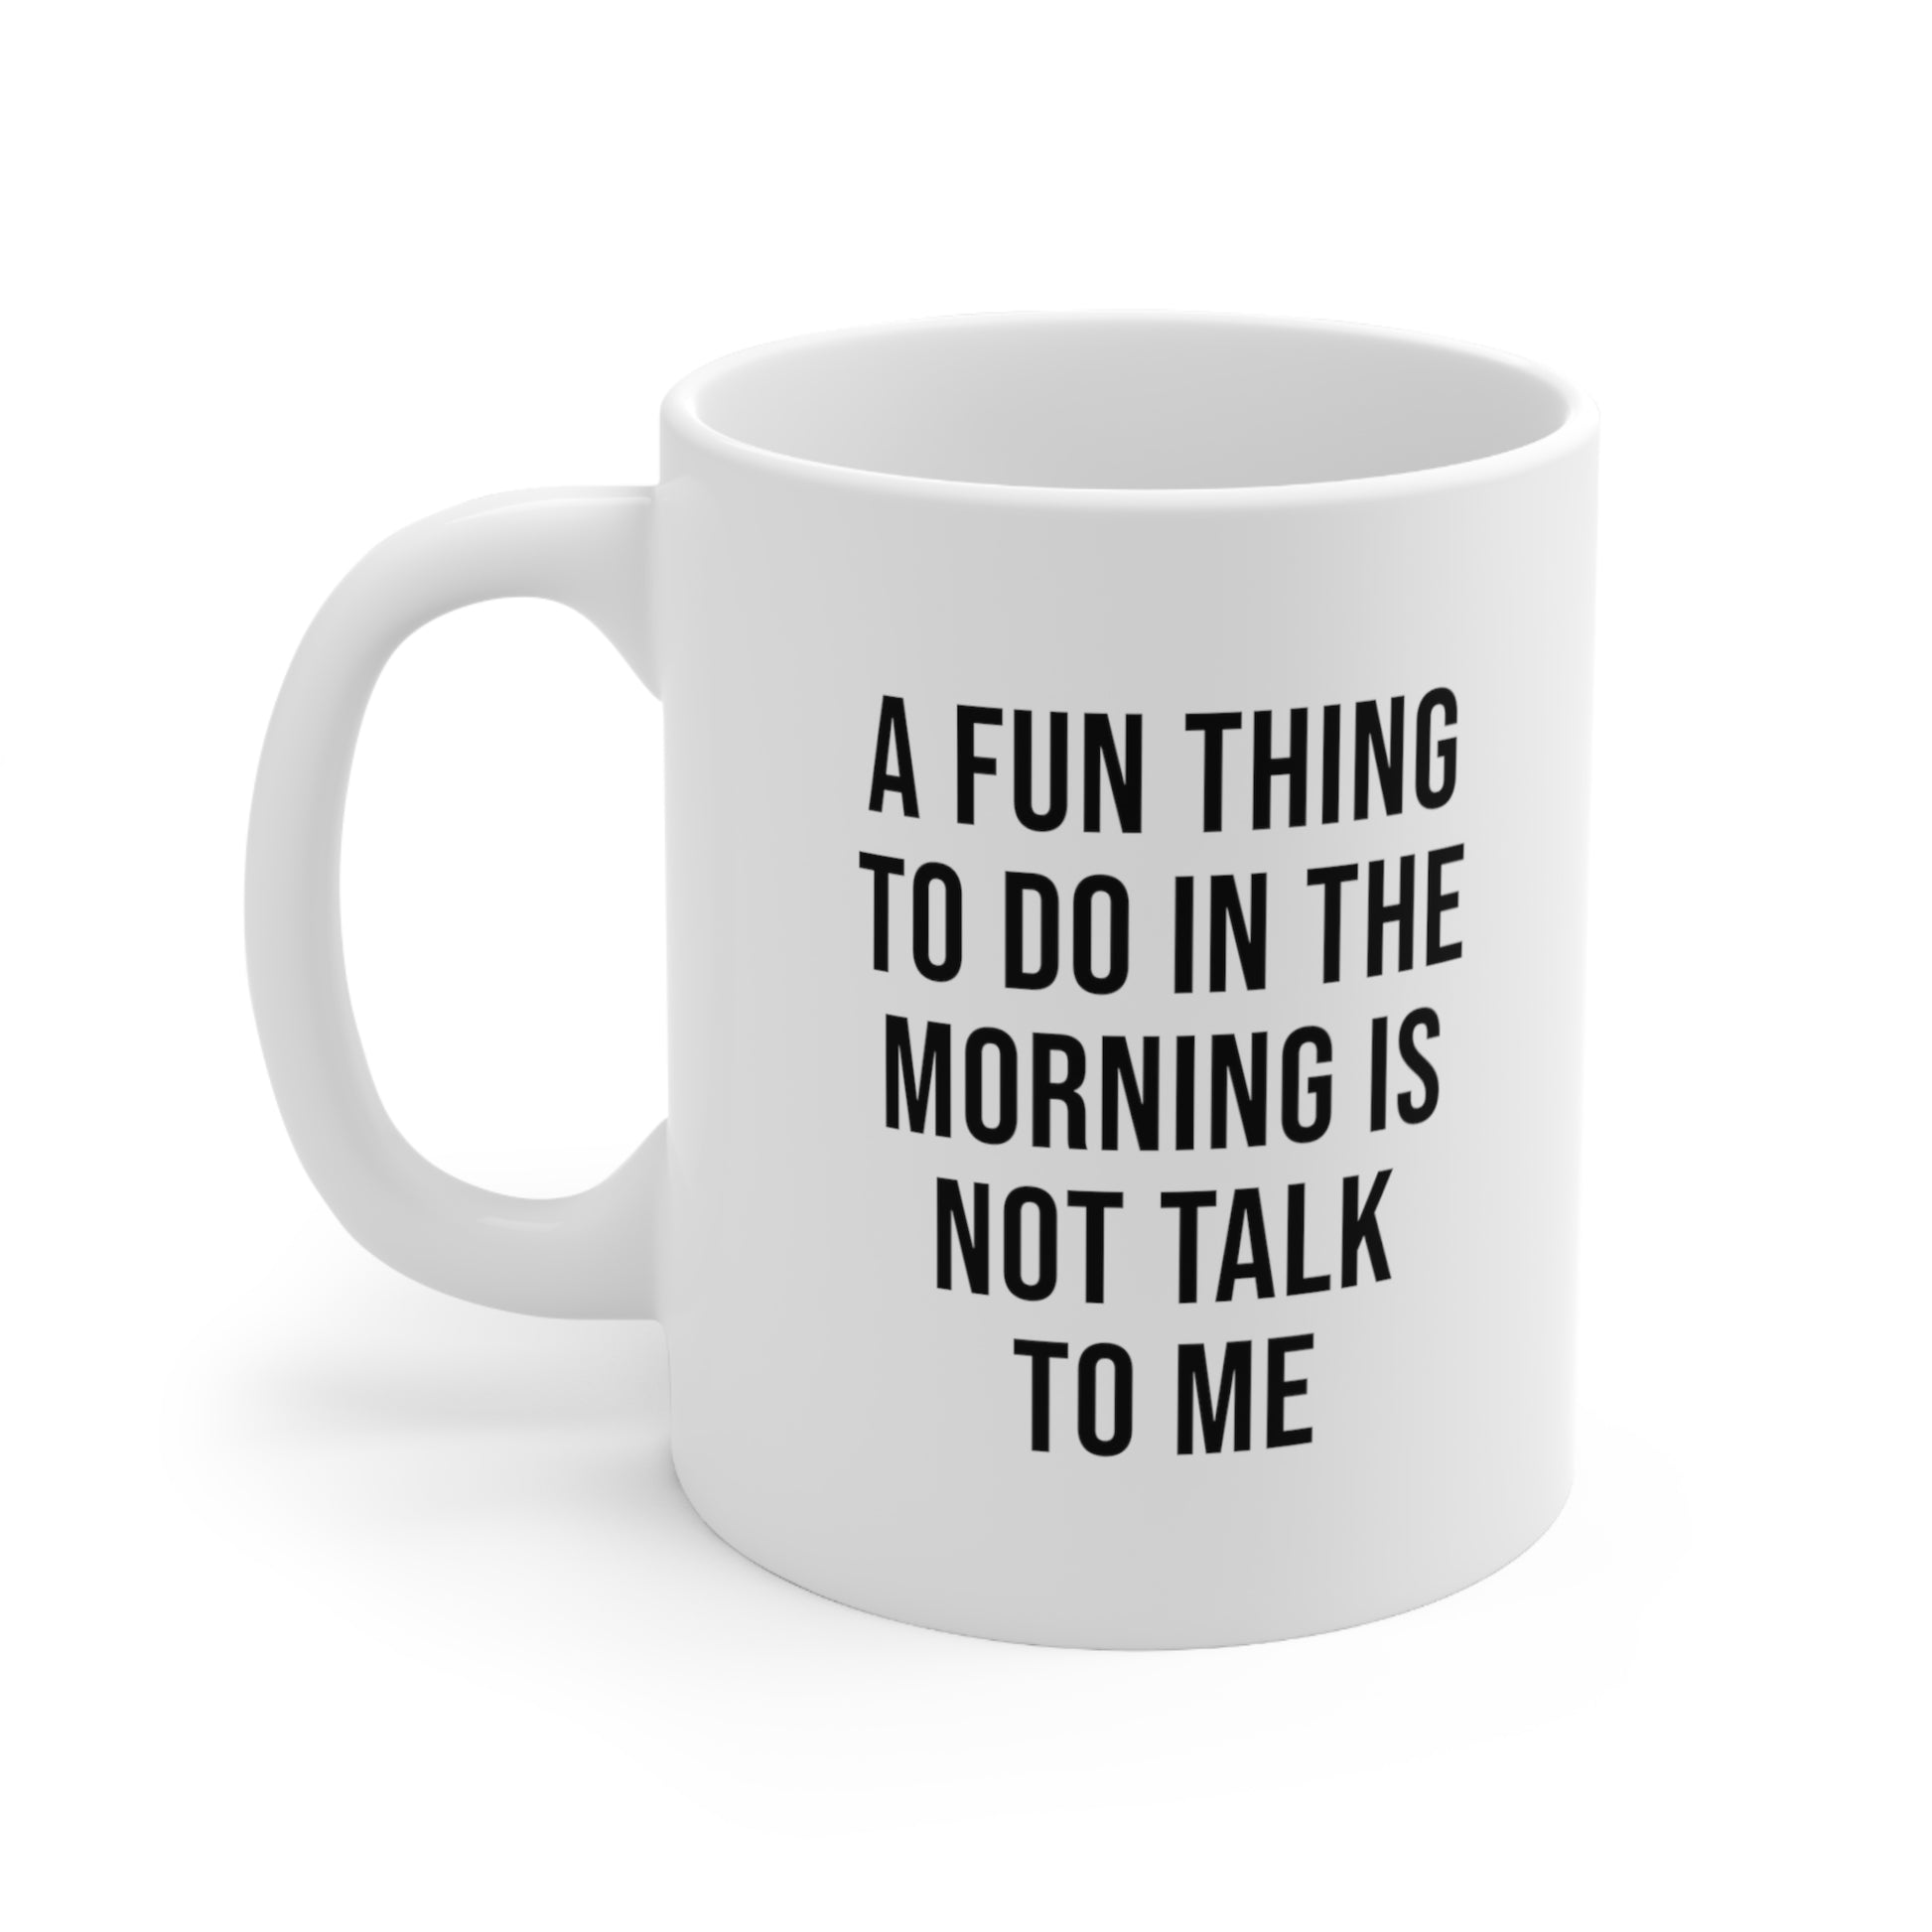 A fun thing to do in the morning is not talk to me Coffee Mug